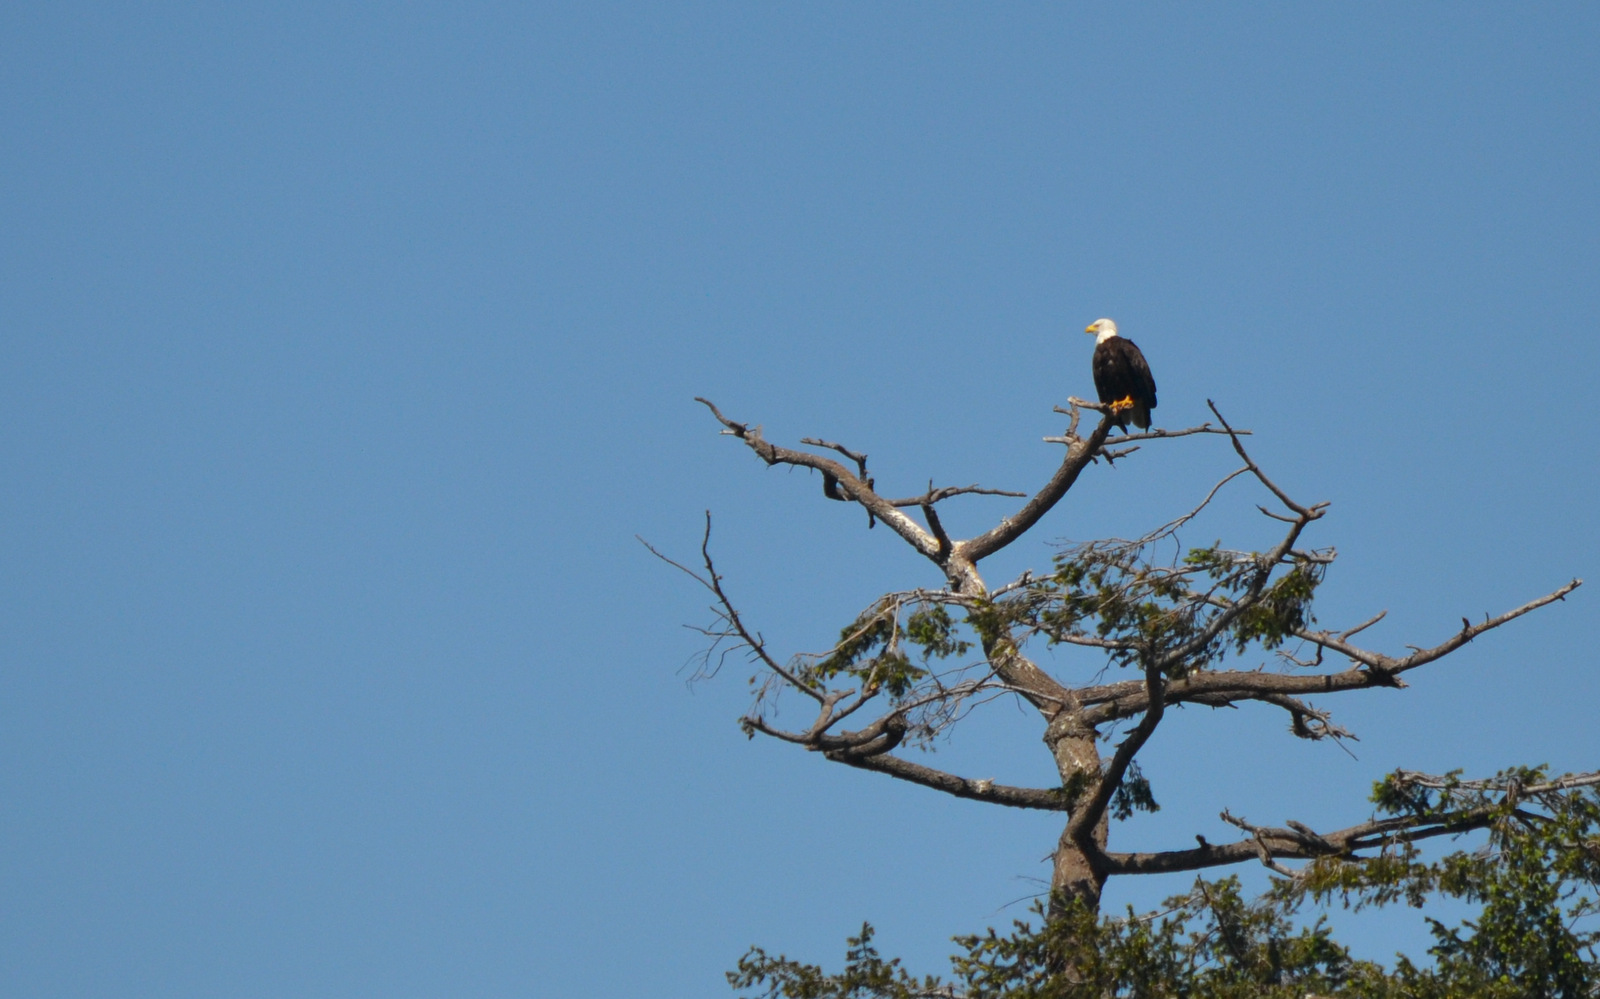 Bald Eagles, Cormorants, and Guillemonts, Oh My!